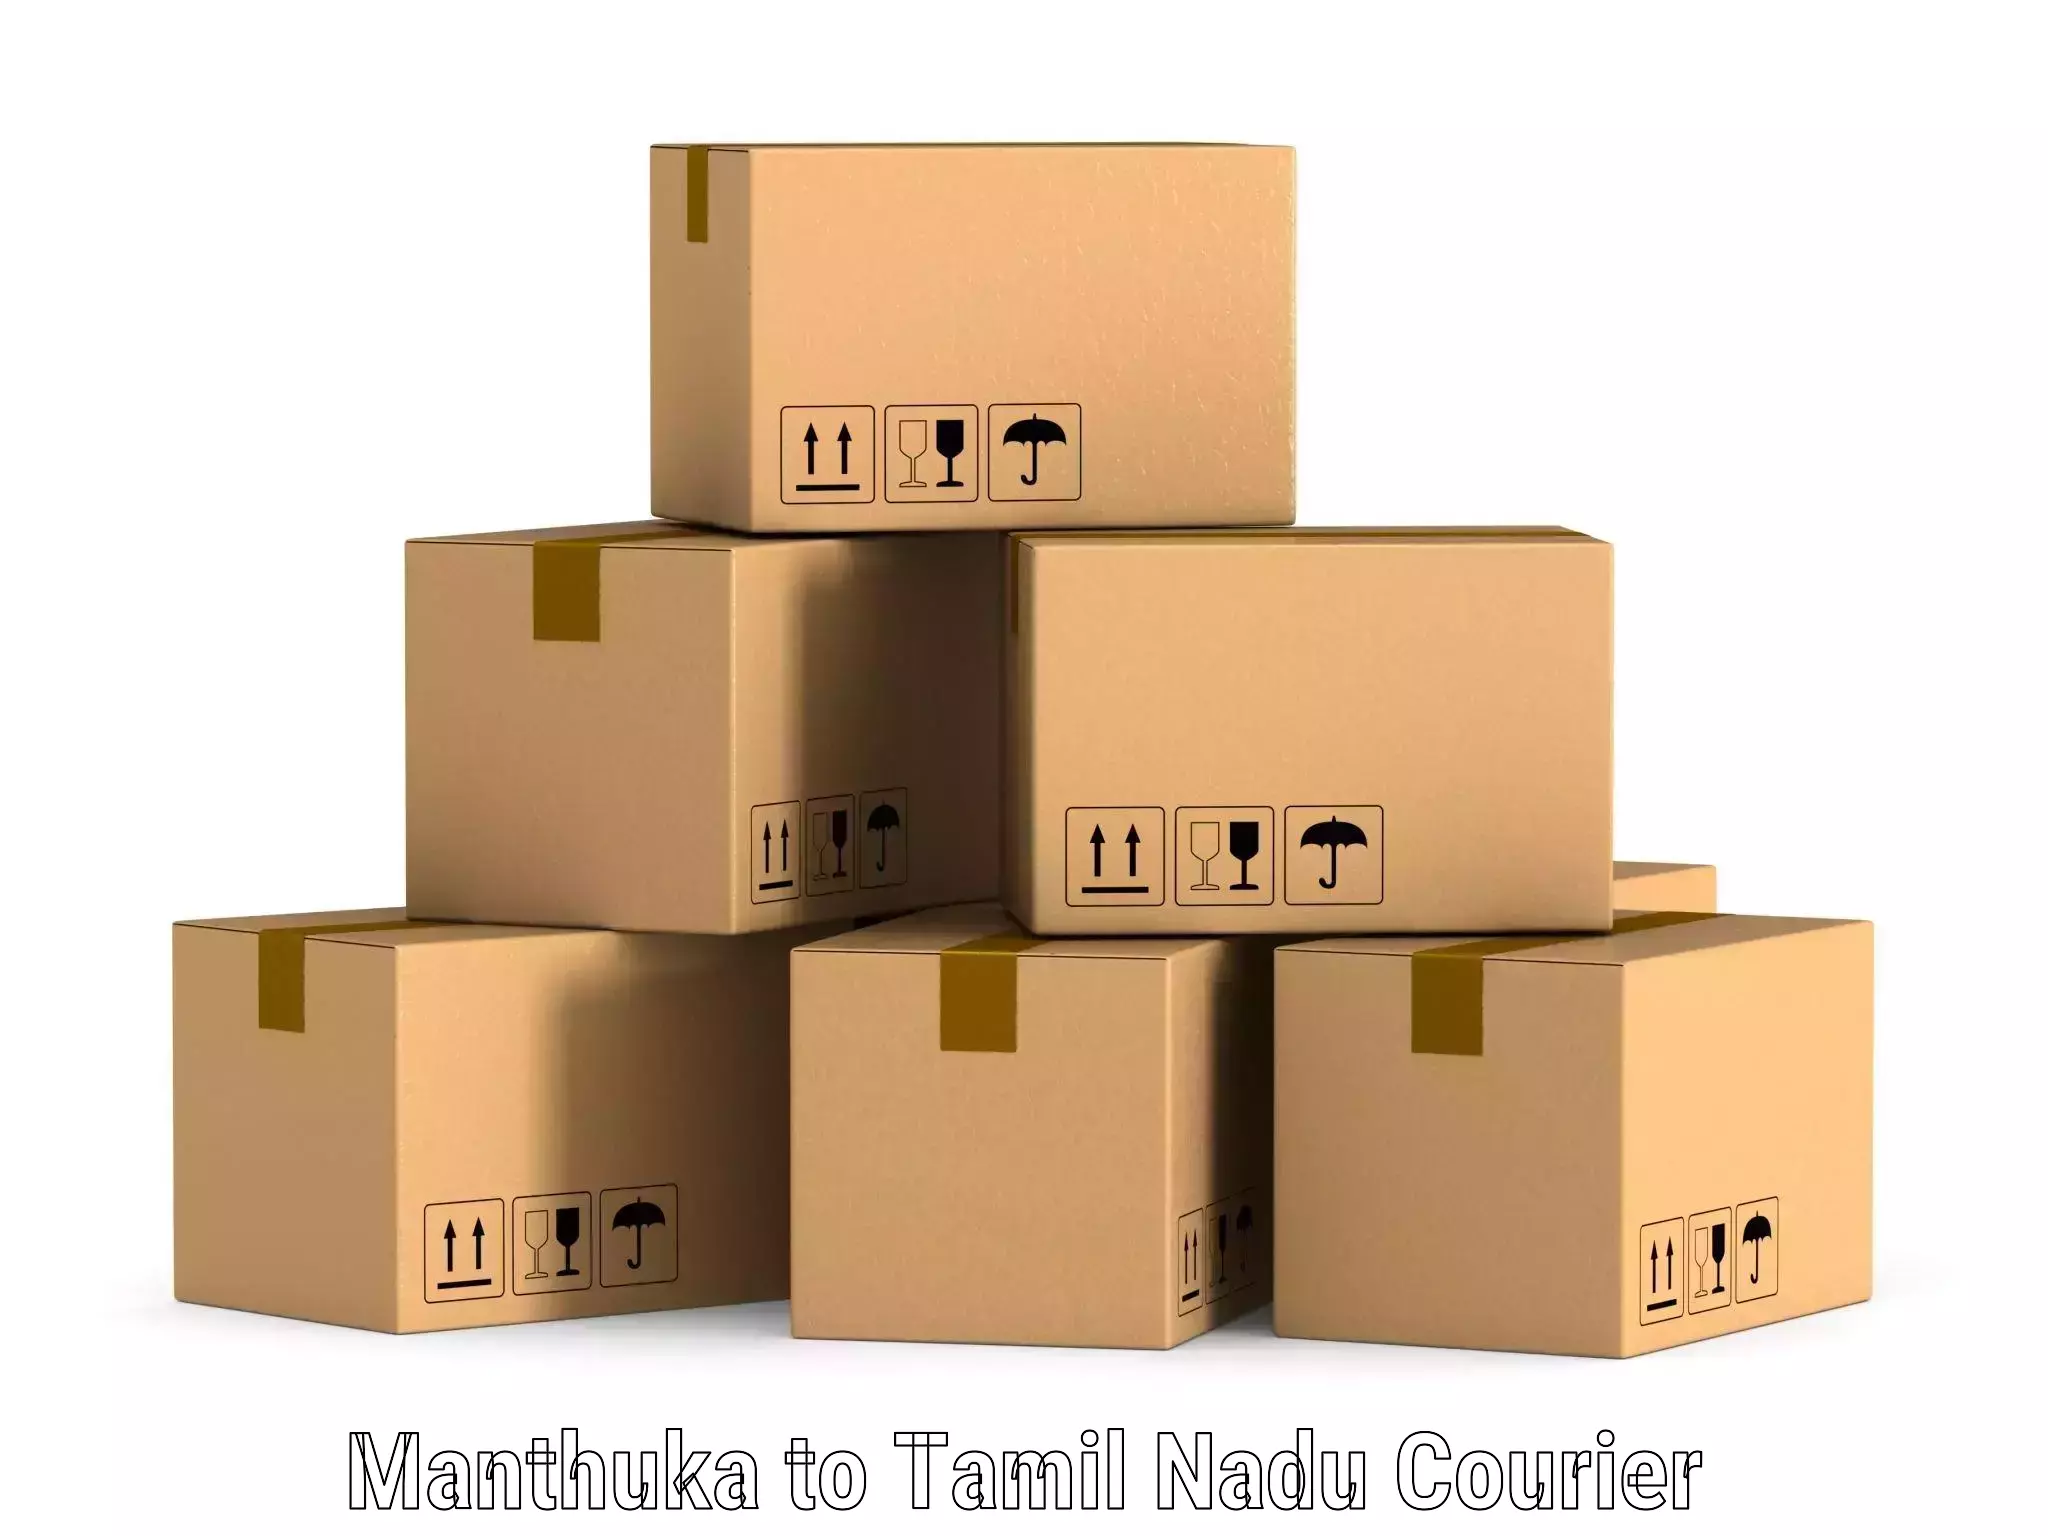 Quality courier services Manthuka to Ennore Port Chennai